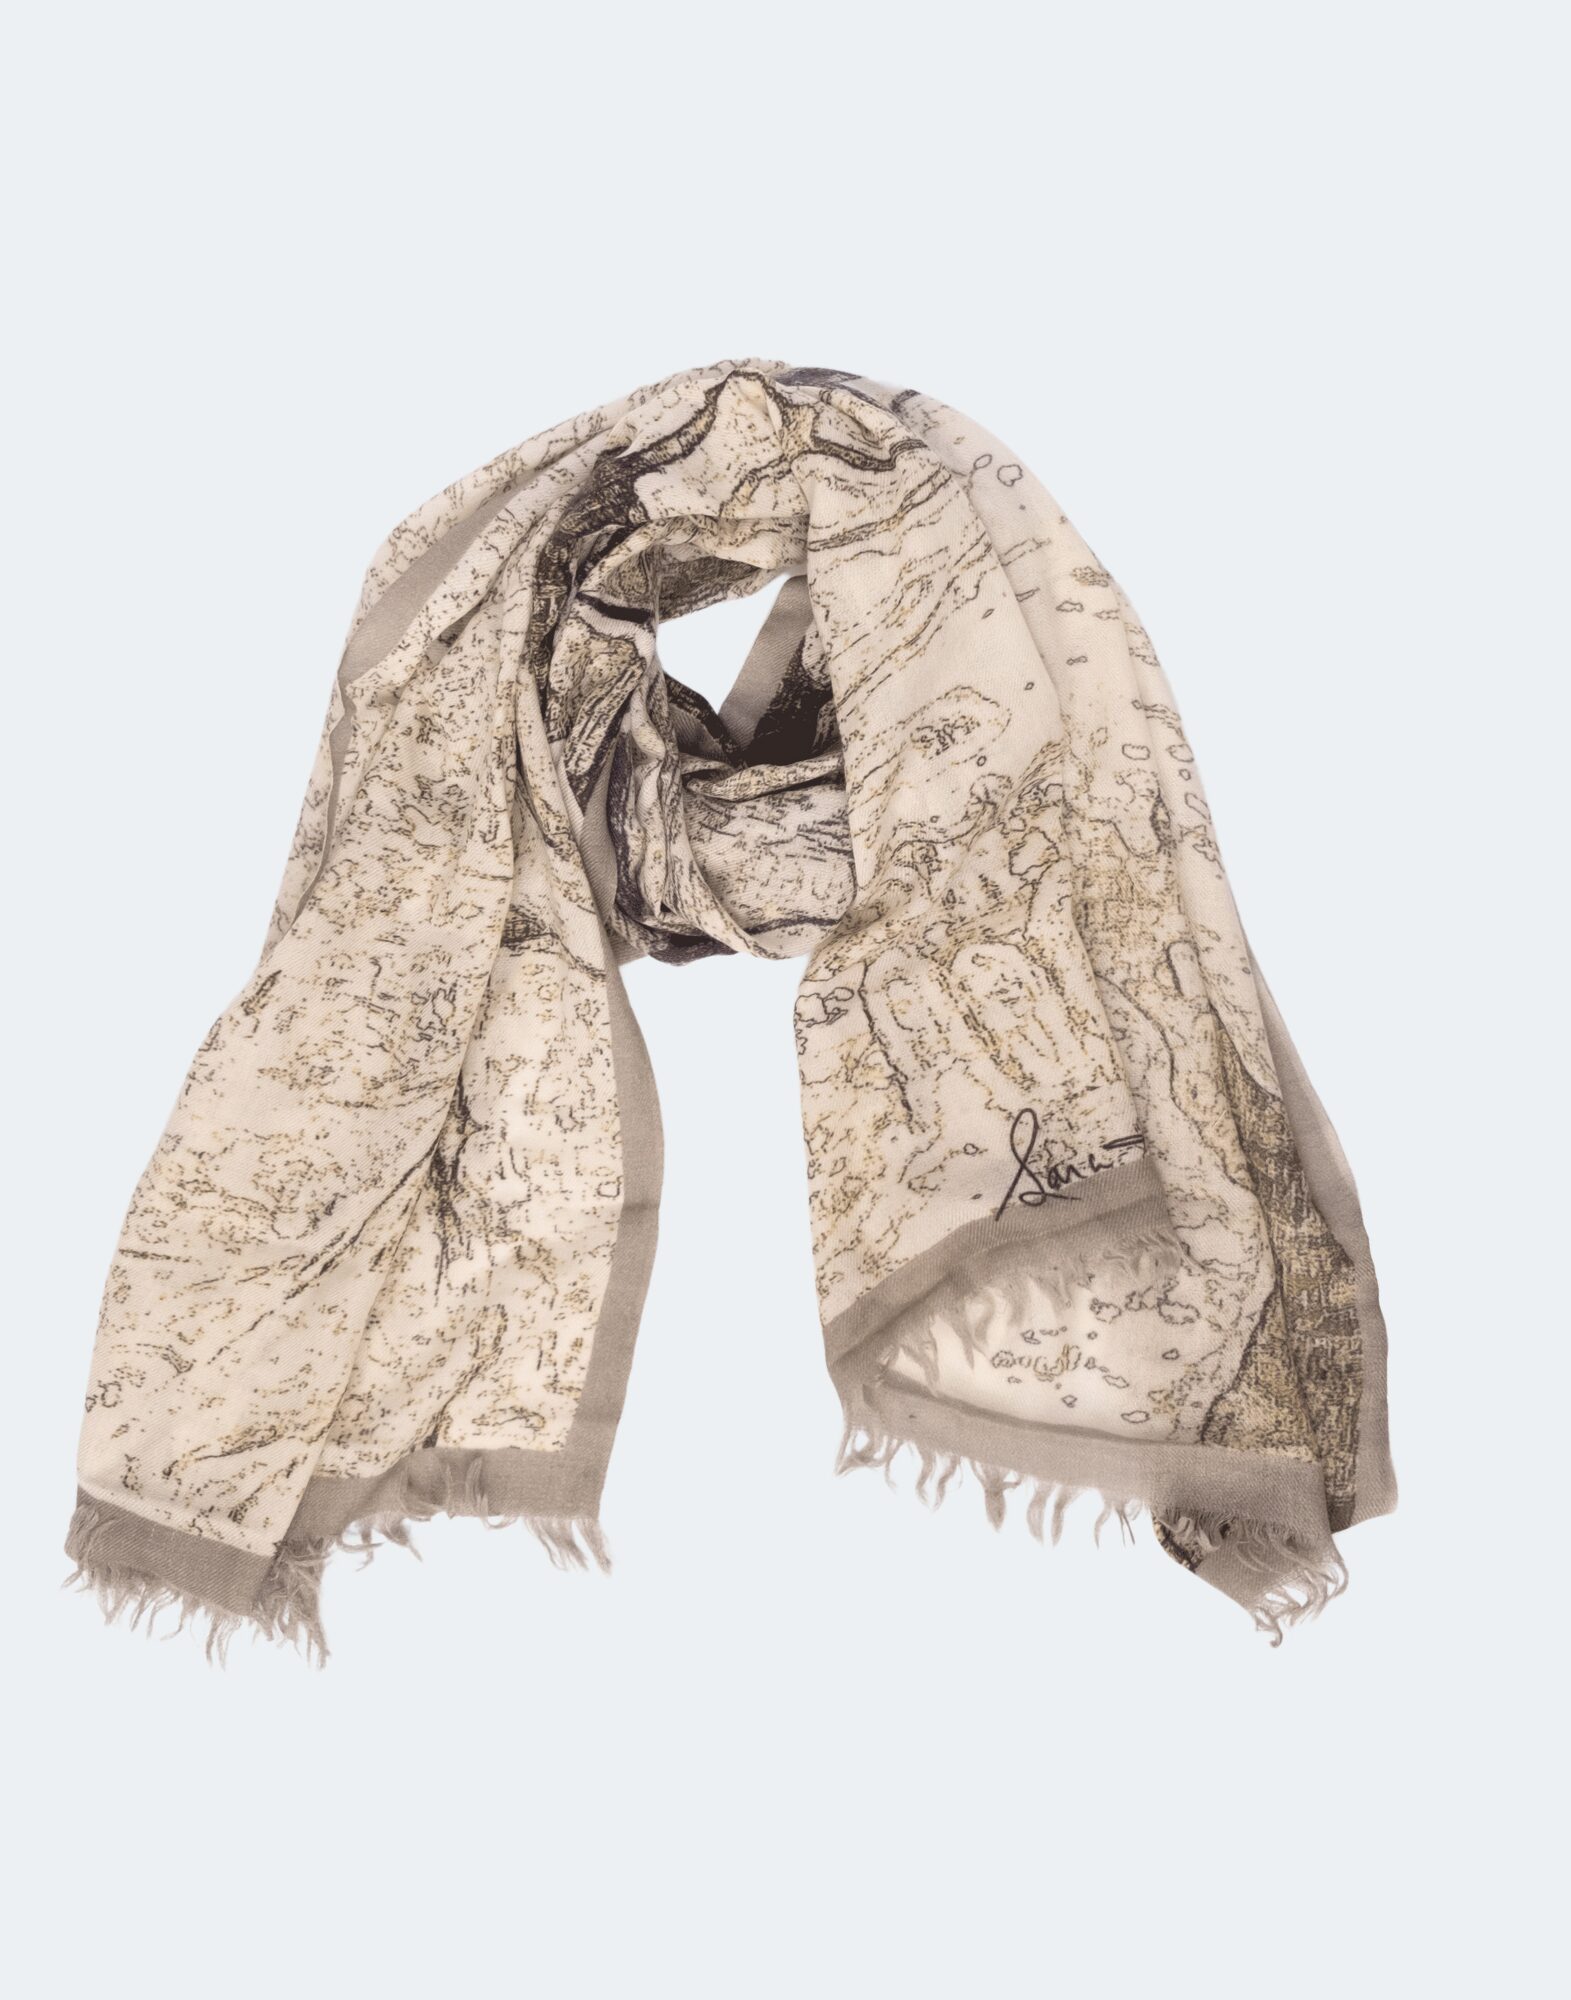 scarf in tans, cremes, and grays that depicts an image of trees